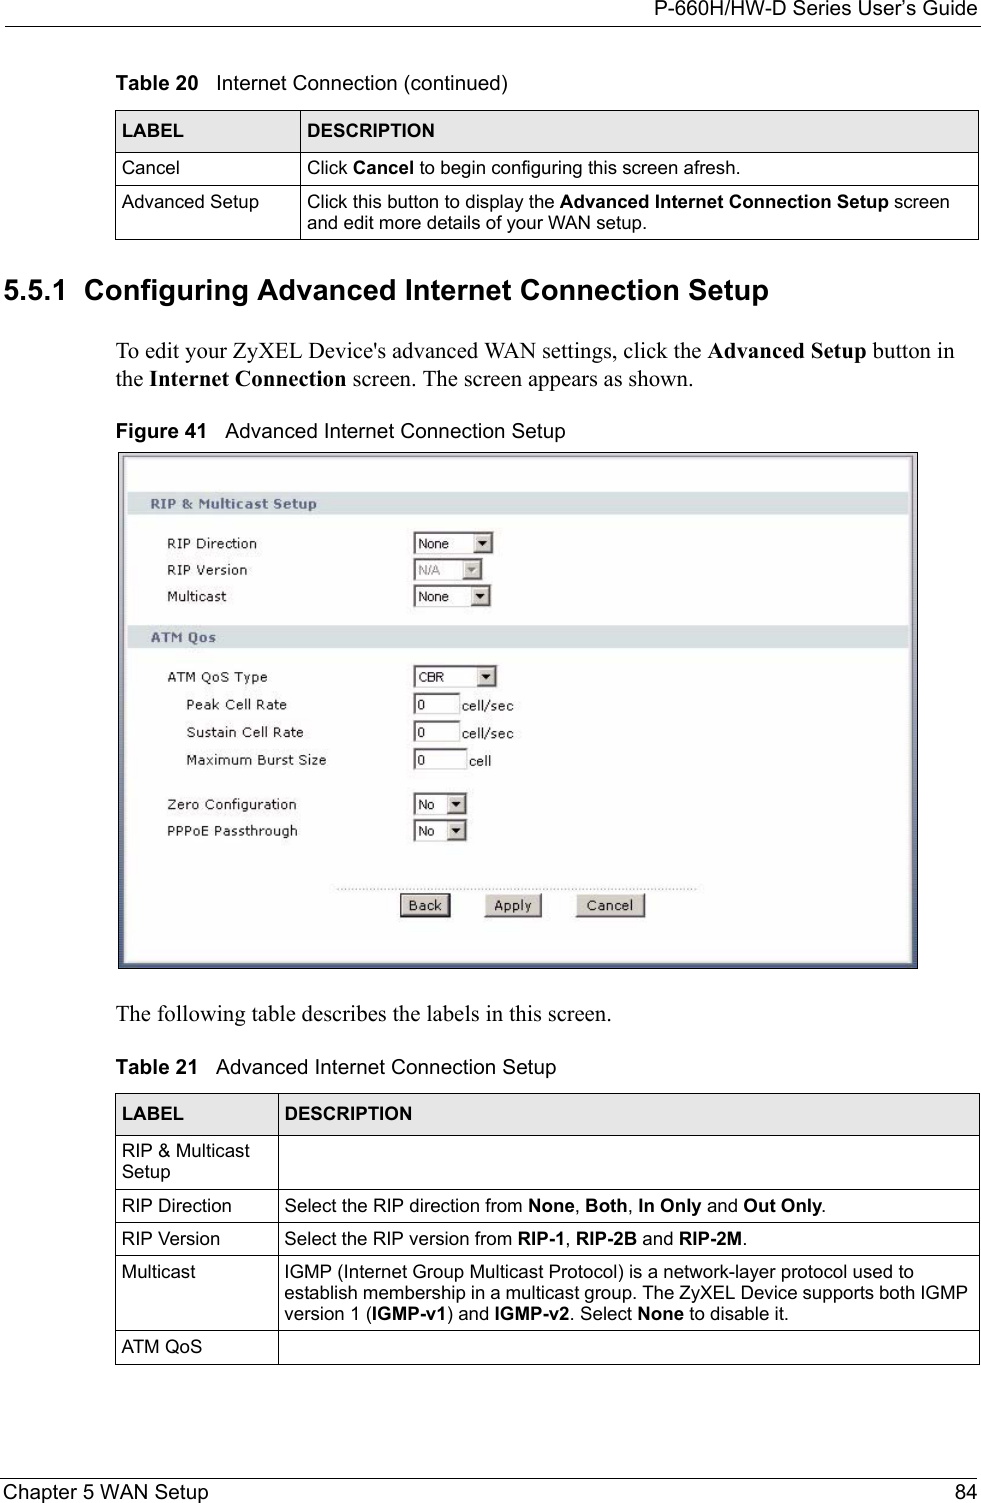 P-660H/HW-D Series User’s GuideChapter 5 WAN Setup 845.5.1  Configuring Advanced Internet Connection Setup To edit your ZyXEL Device&apos;s advanced WAN settings, click the Advanced Setup button in the Internet Connection screen. The screen appears as shown.Figure 41   Advanced Internet Connection SetupThe following table describes the labels in this screen.  Cancel Click Cancel to begin configuring this screen afresh.Advanced Setup Click this button to display the Advanced Internet Connection Setup screen and edit more details of your WAN setup.Table 20   Internet Connection (continued)LABEL DESCRIPTIONTable 21   Advanced Internet Connection SetupLABEL DESCRIPTIONRIP &amp; Multicast SetupRIP Direction Select the RIP direction from None, Both, In Only and Out Only.RIP Version Select the RIP version from RIP-1, RIP-2B and RIP-2M.Multicast IGMP (Internet Group Multicast Protocol) is a network-layer protocol used to establish membership in a multicast group. The ZyXEL Device supports both IGMP version 1 (IGMP-v1) and IGMP-v2. Select None to disable it.ATM QoS